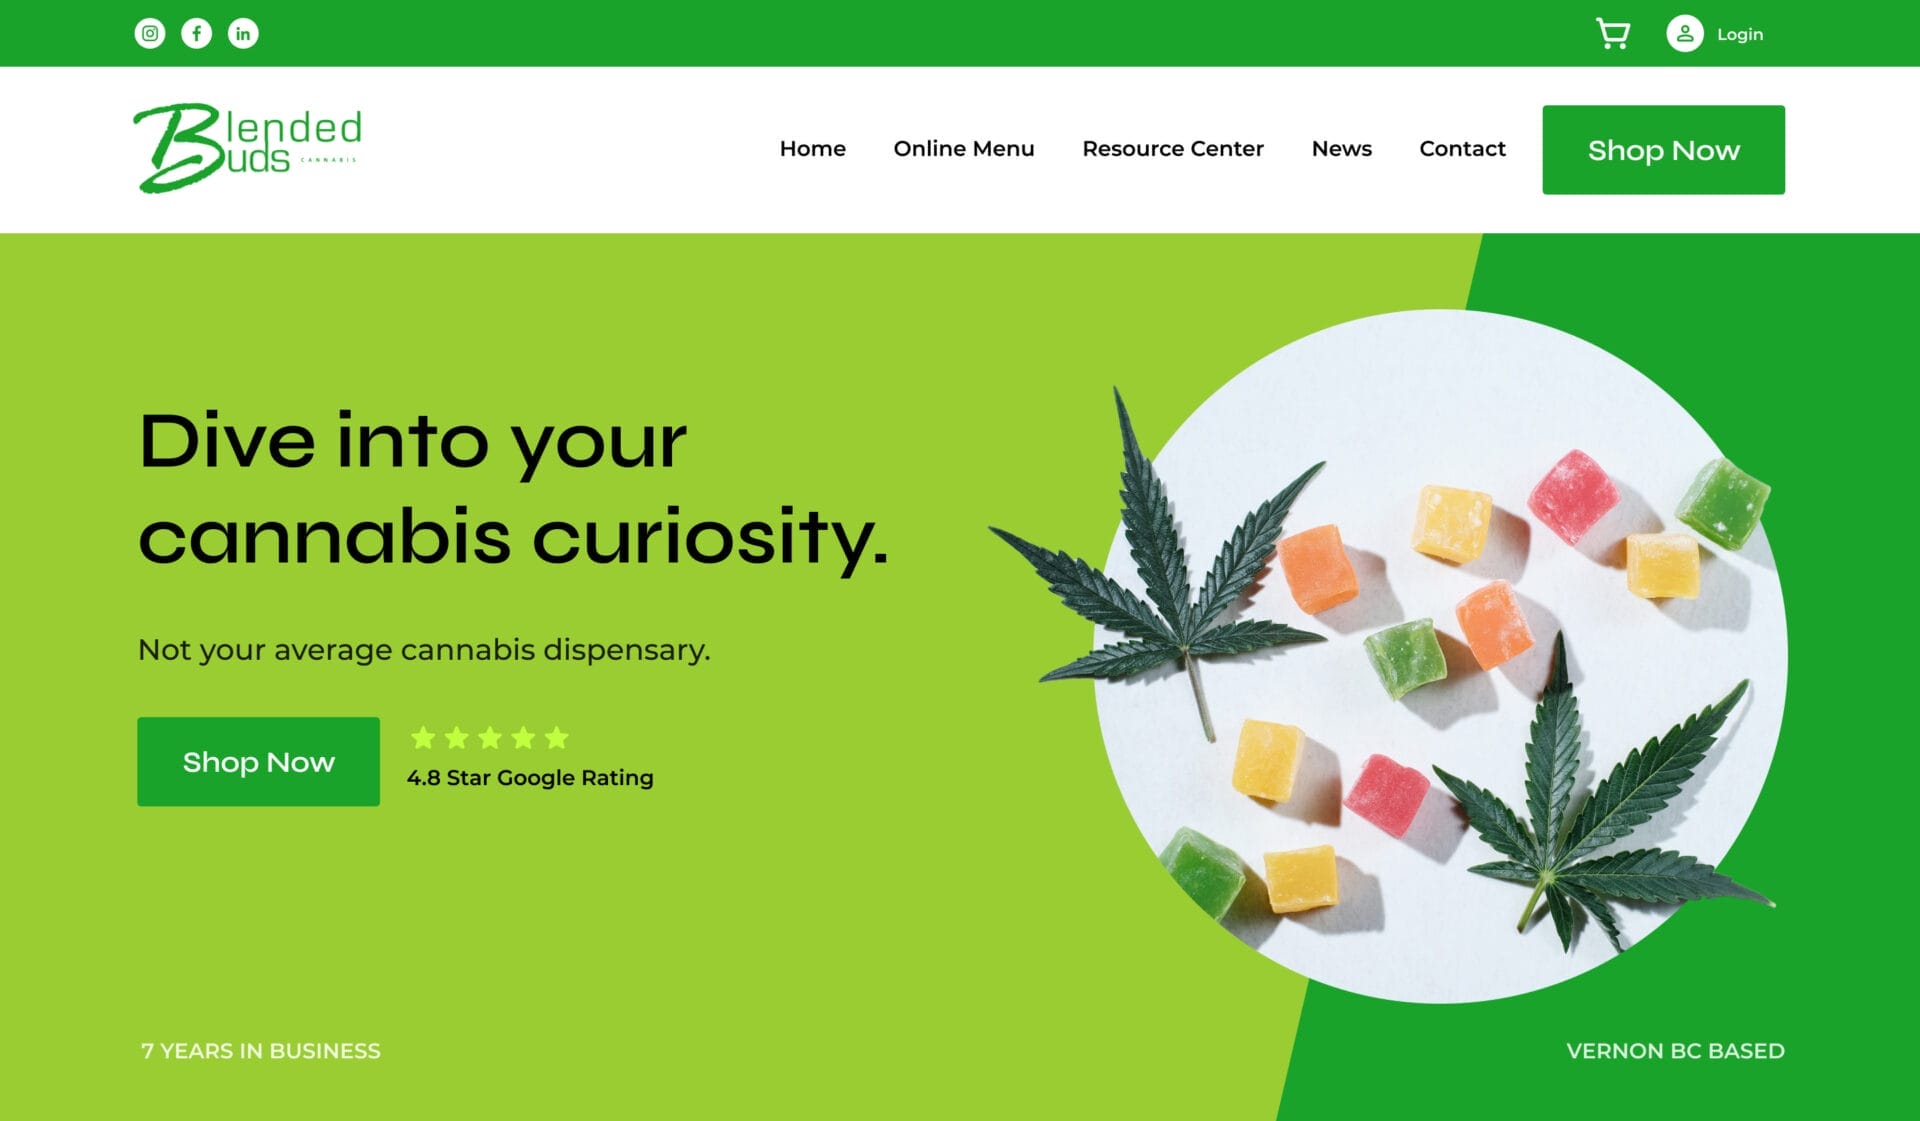 The homepage of a cannabis website.